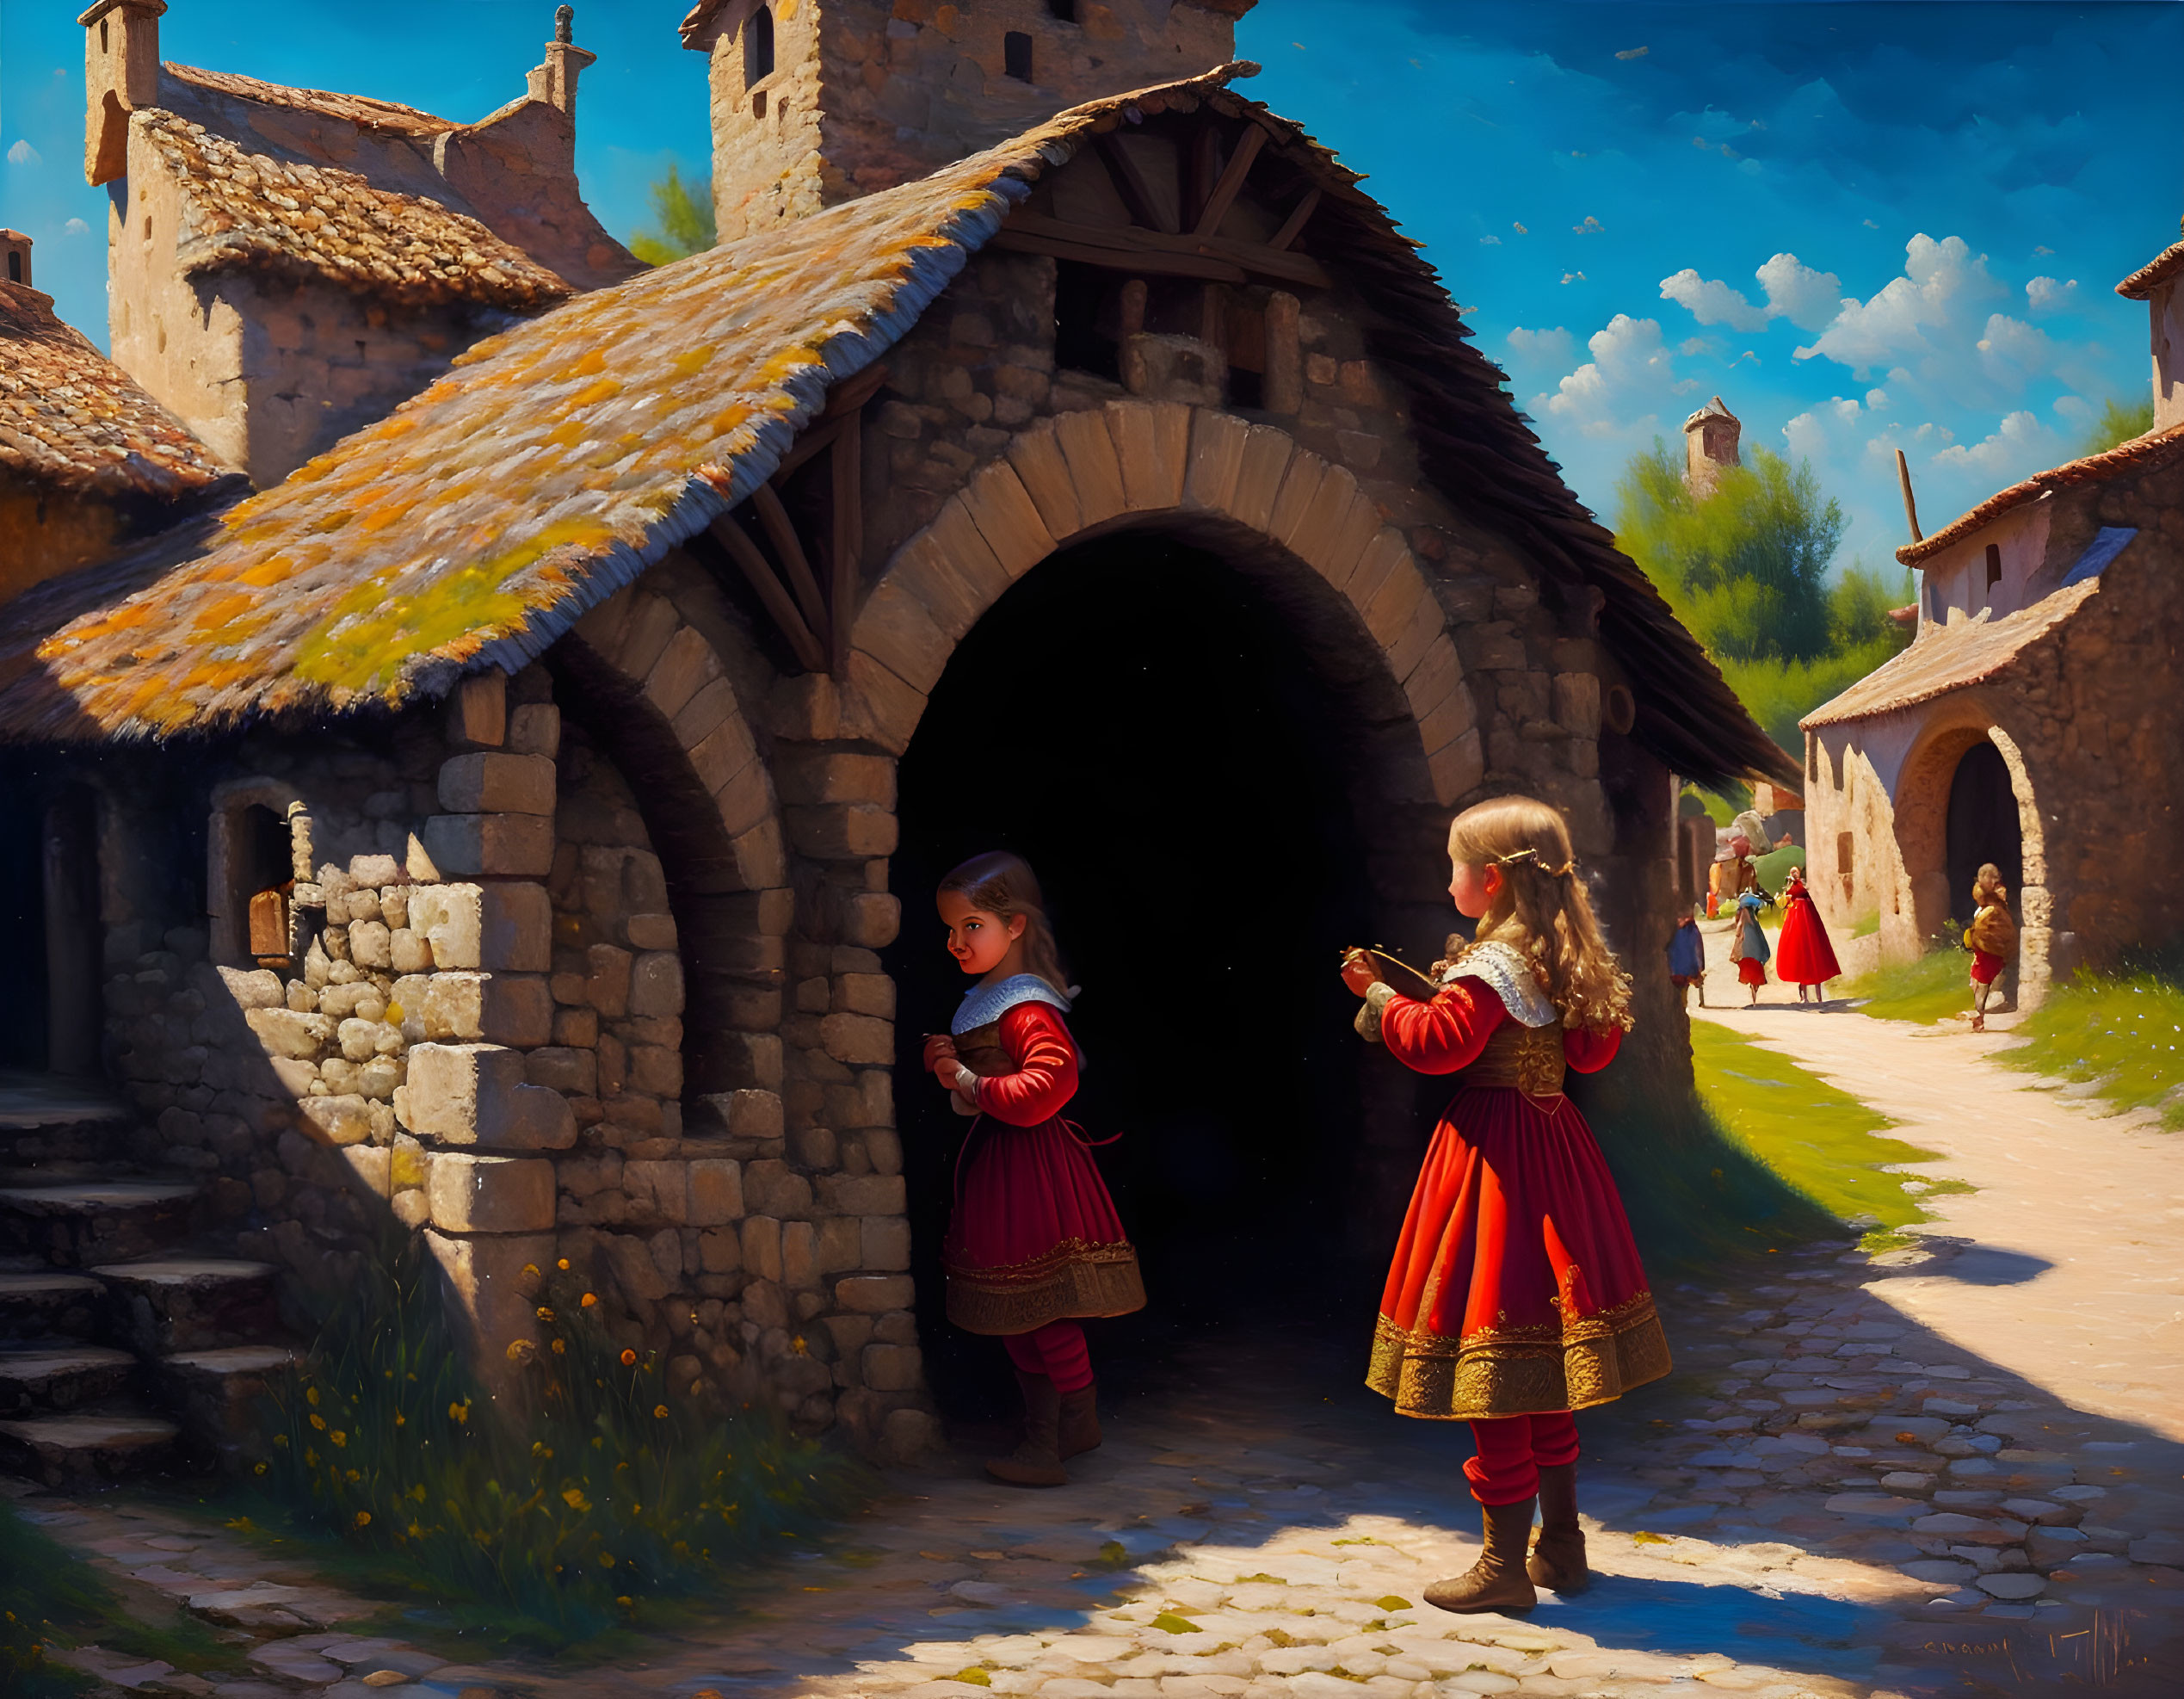 Traditional dresses worn by two girls in medieval village setting